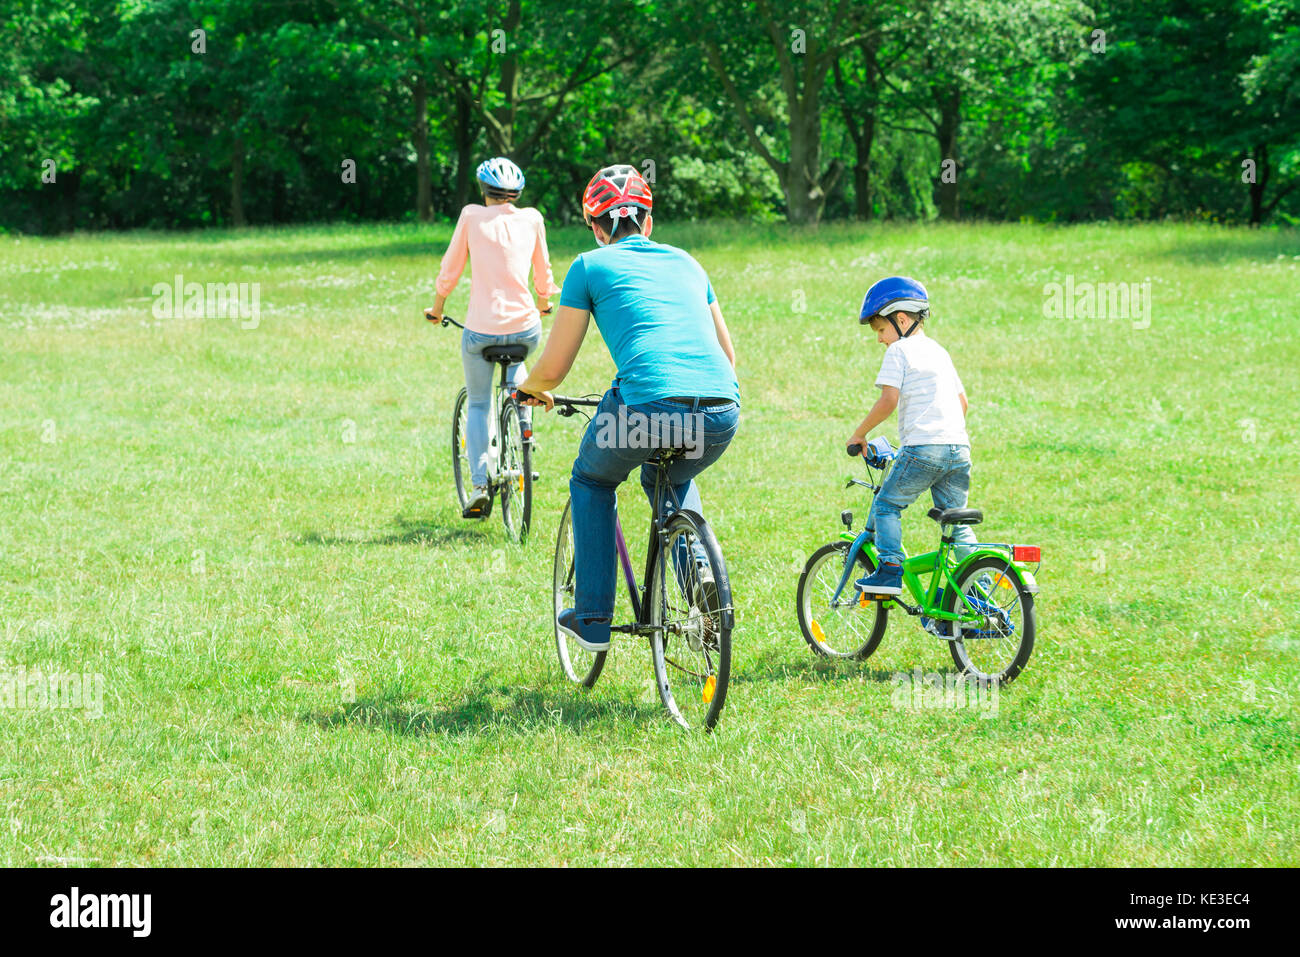 Rear View Of A Family Riding Bicycle On The Green Grass In The Park Stock Photo